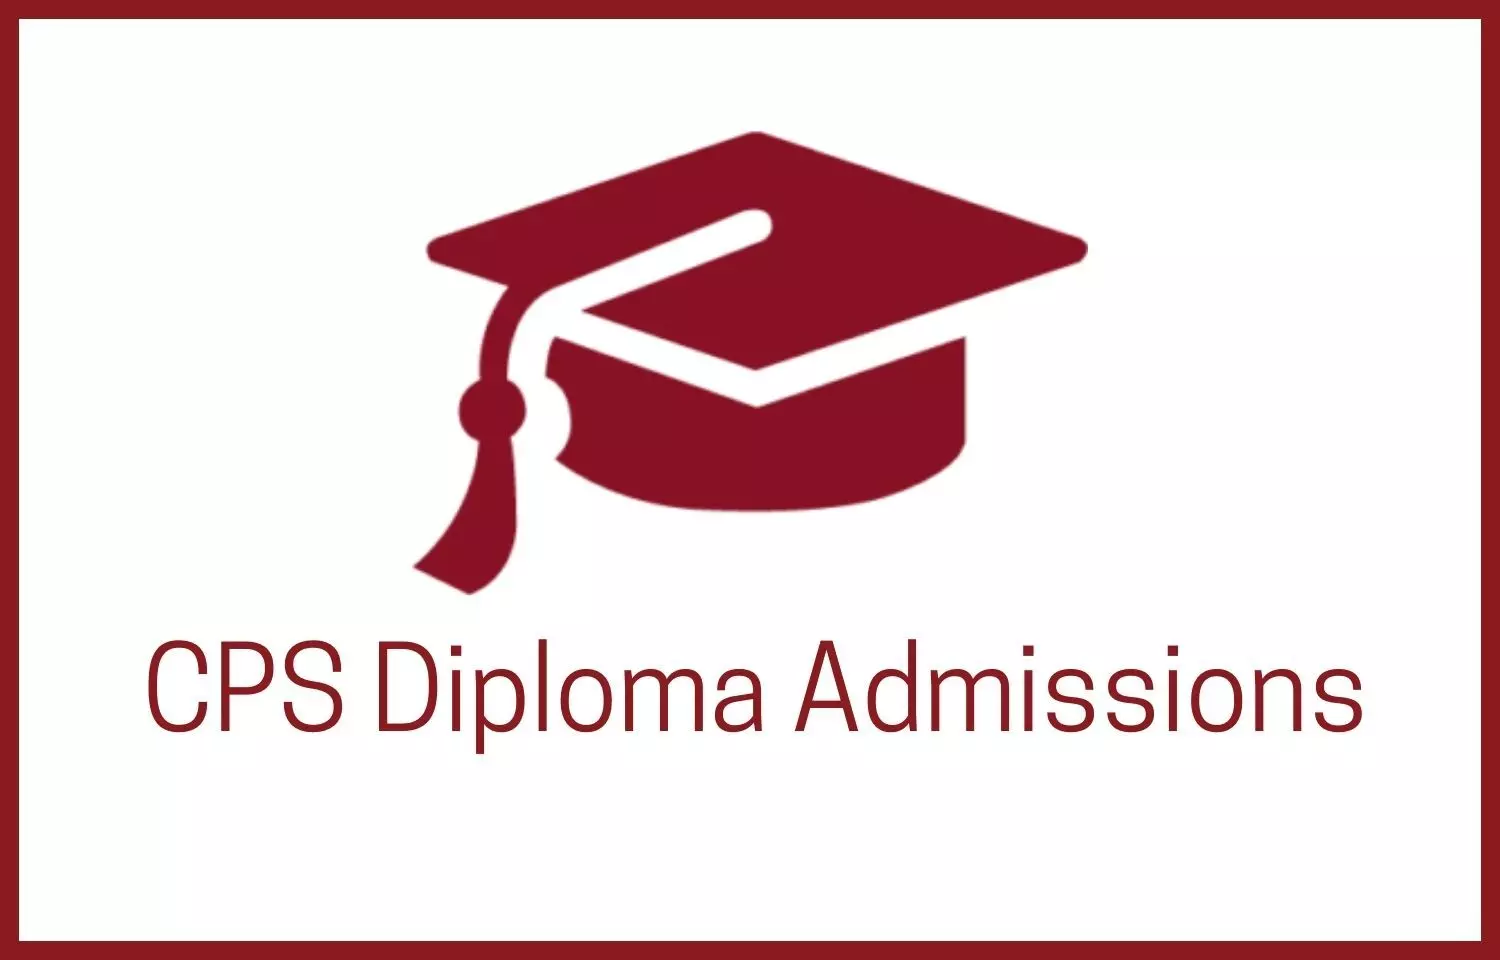 53 seats available for Round 2 CPS Diploma admissions in Gujarat, Check out counselling schedule